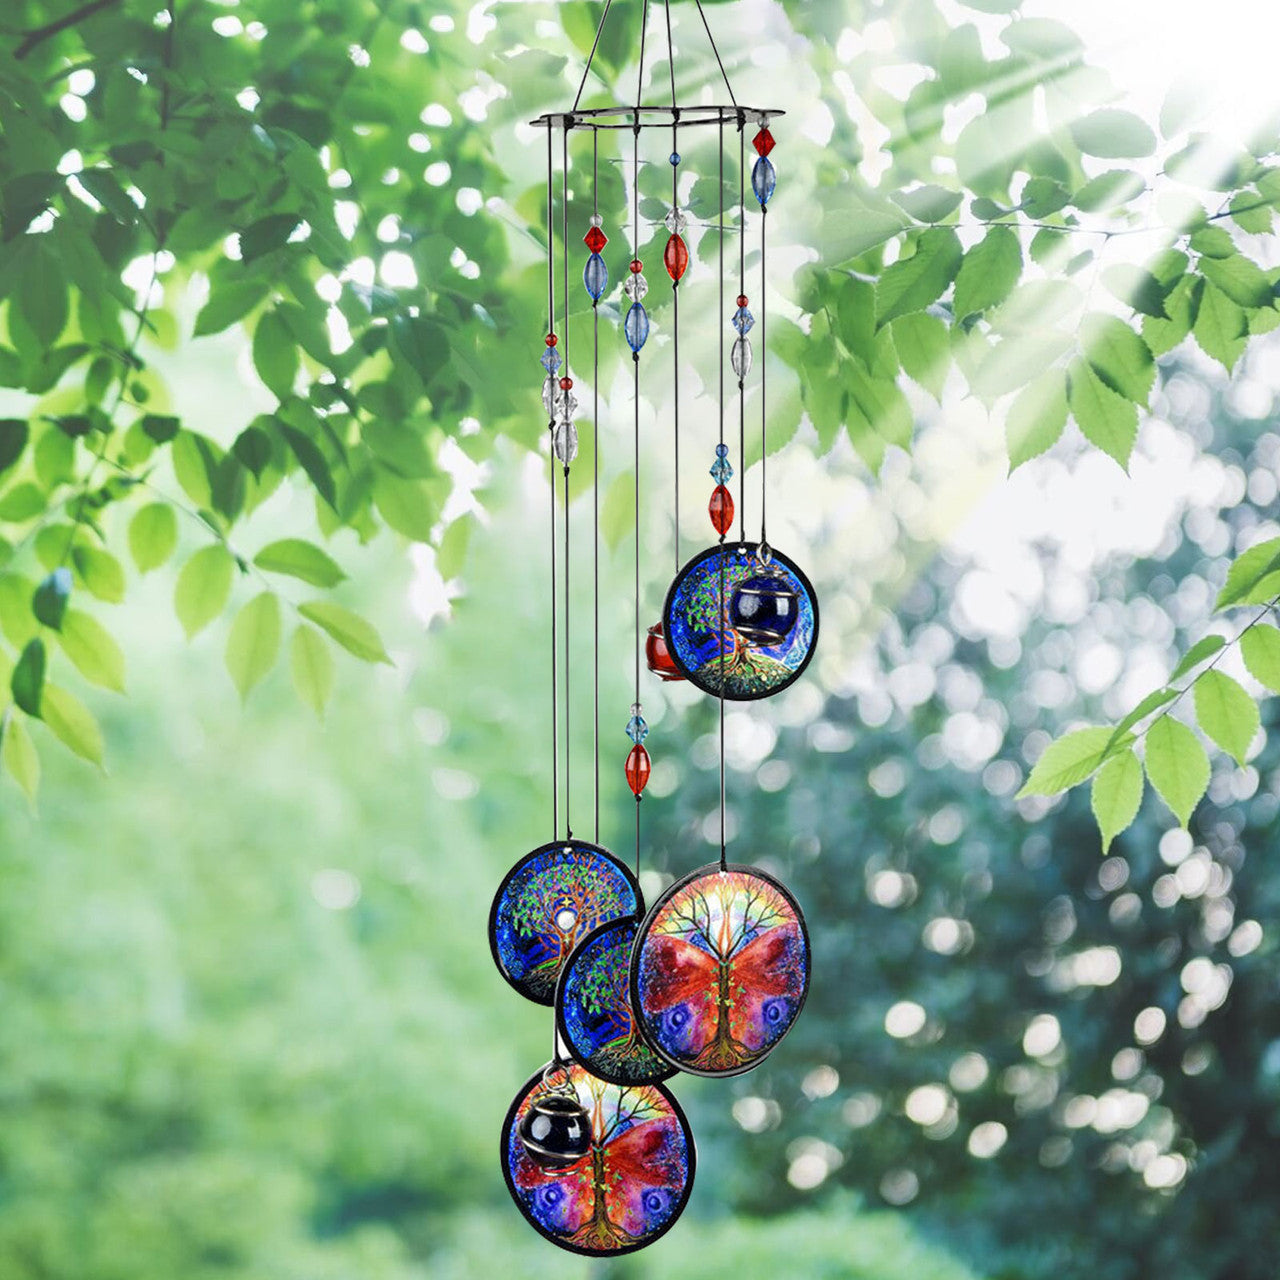 Wind Chimes for Home Garden Decoration, Tree of Life Wall Hanging Ornament Decor Wind Chime with Melodious Sound for Patio, Porch, Garden Backyard, Meaningful and Lucky Gift for Family Friends